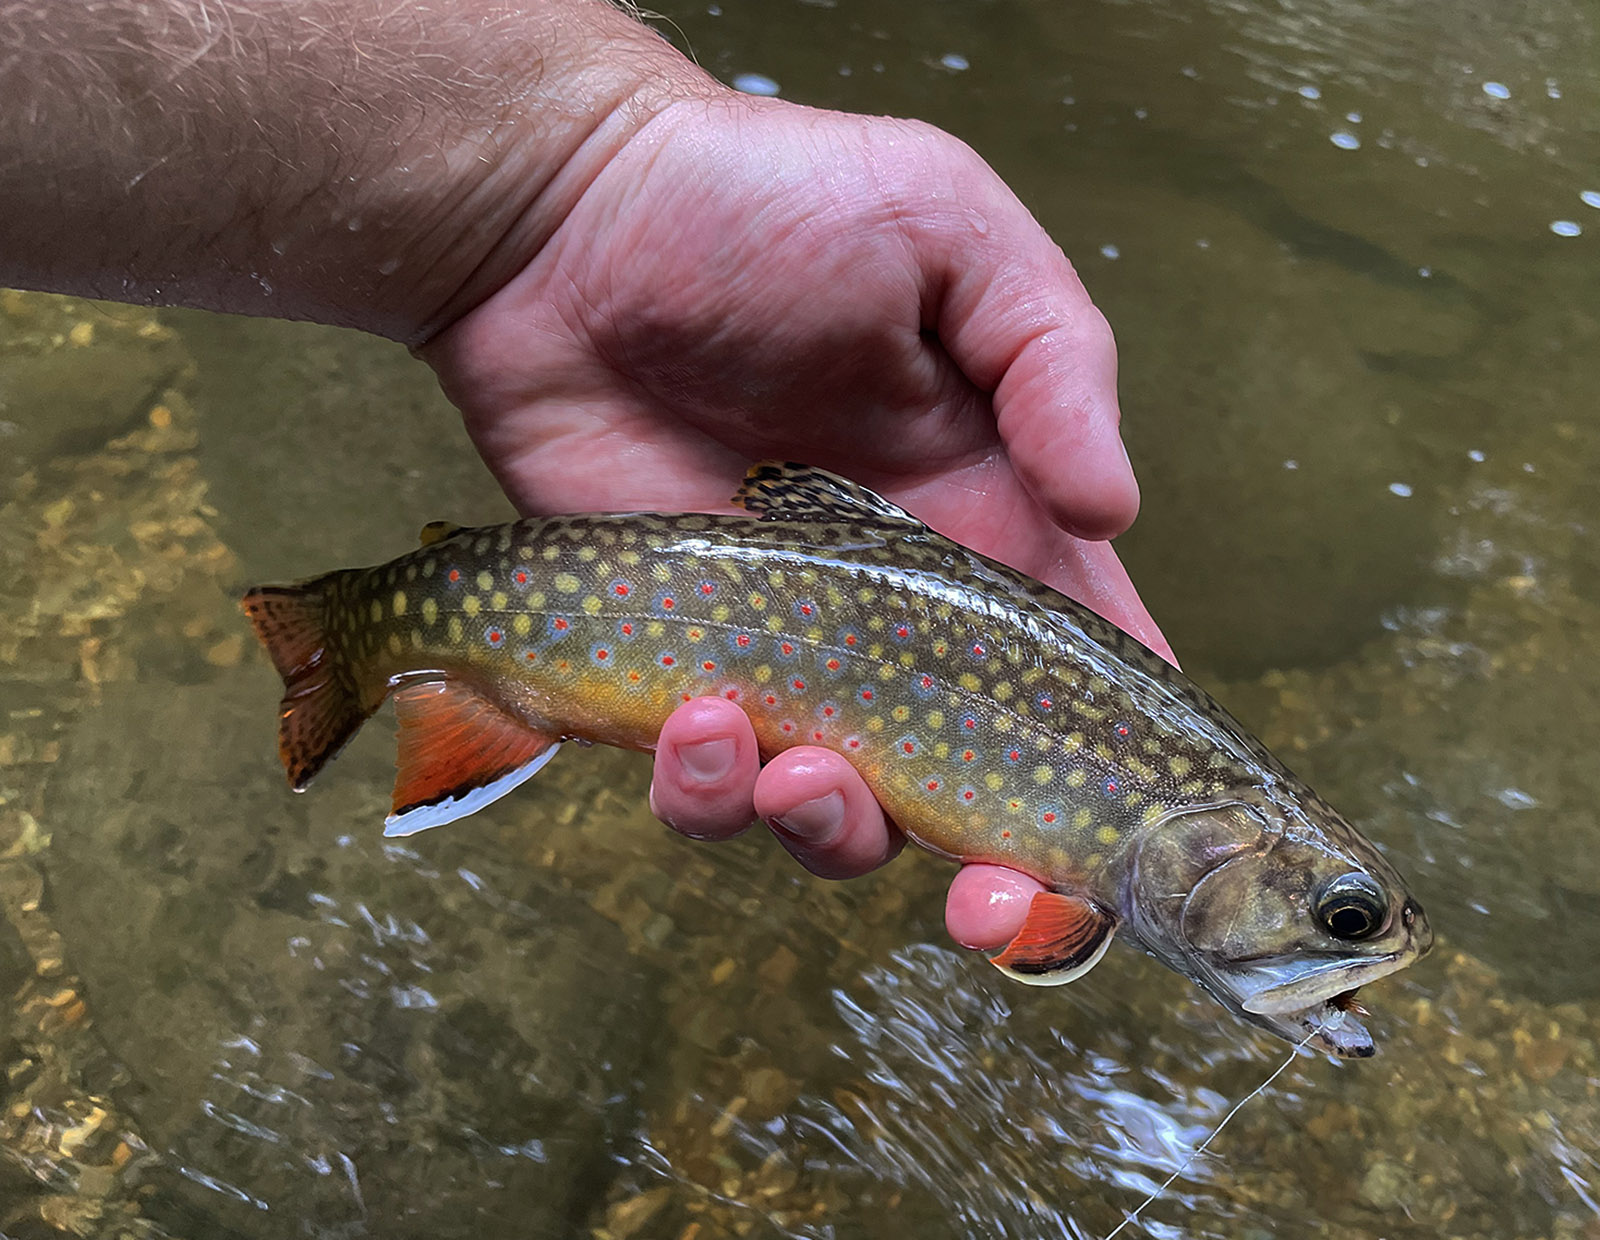 A photo of a colorful brook trout, with red and yellow dots, being held out of the water in a hand.